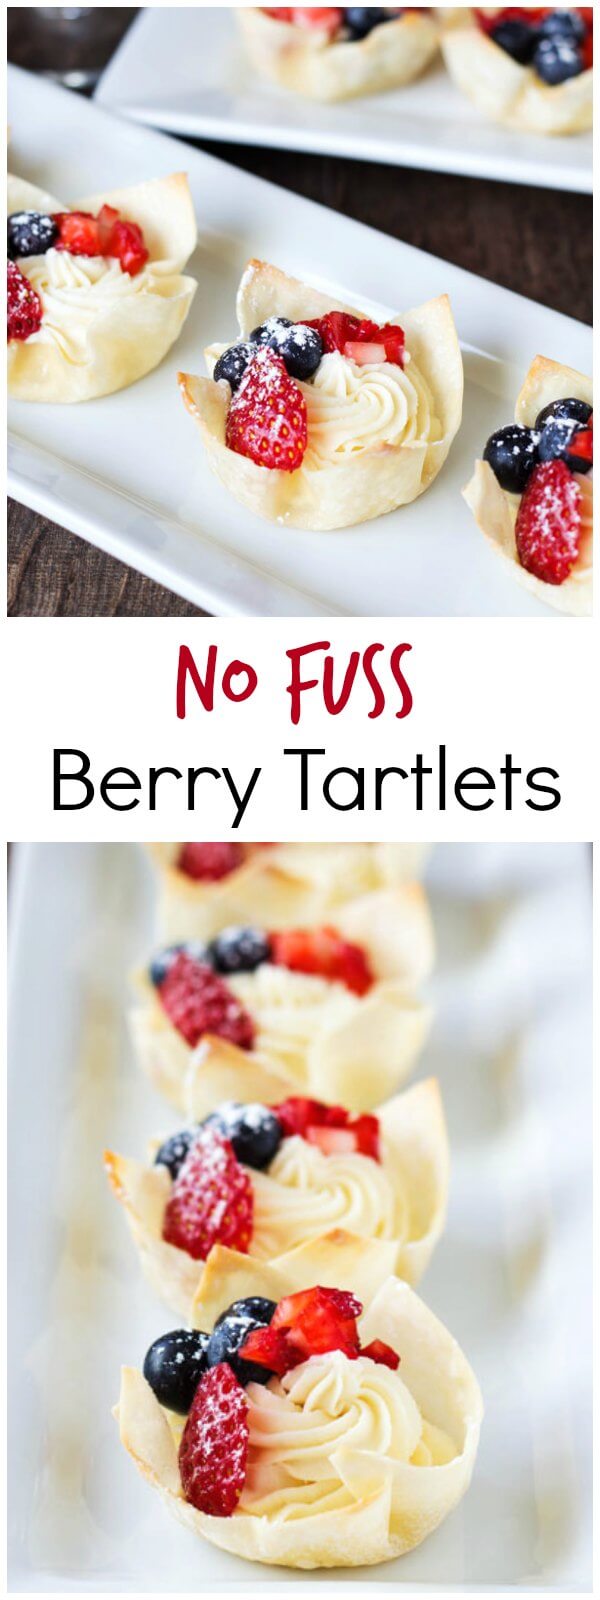 These crunchy, creamy, juicy mini berry tartlets are super easy to make. No pastry dough needed!